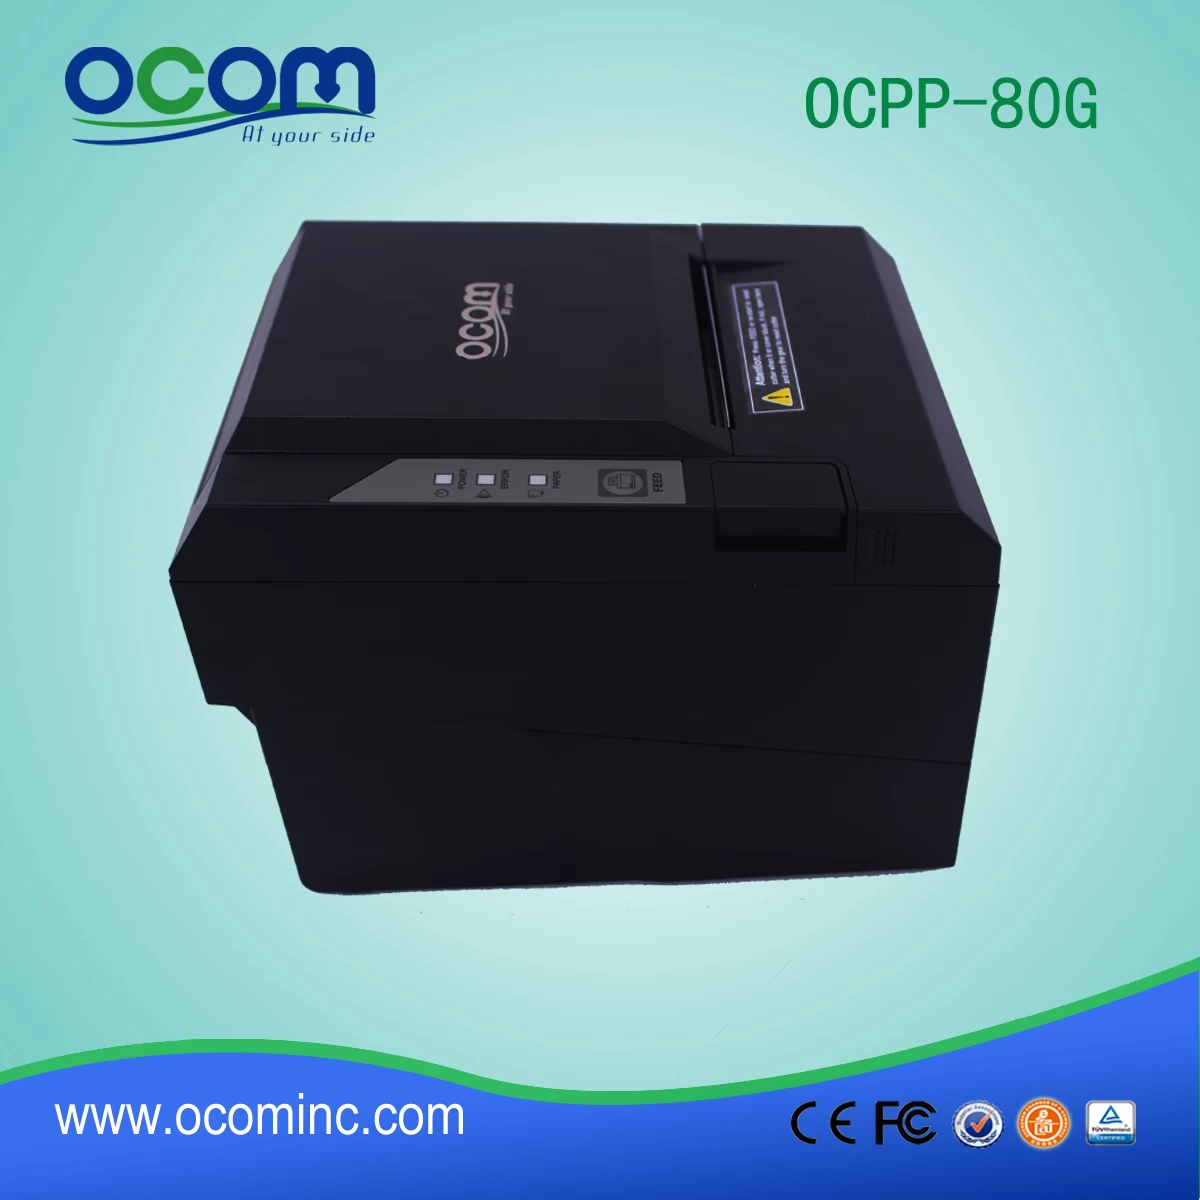 80mm POS receipt thermal printer with USB serial lan port and auto cutter (OCPP-80G)